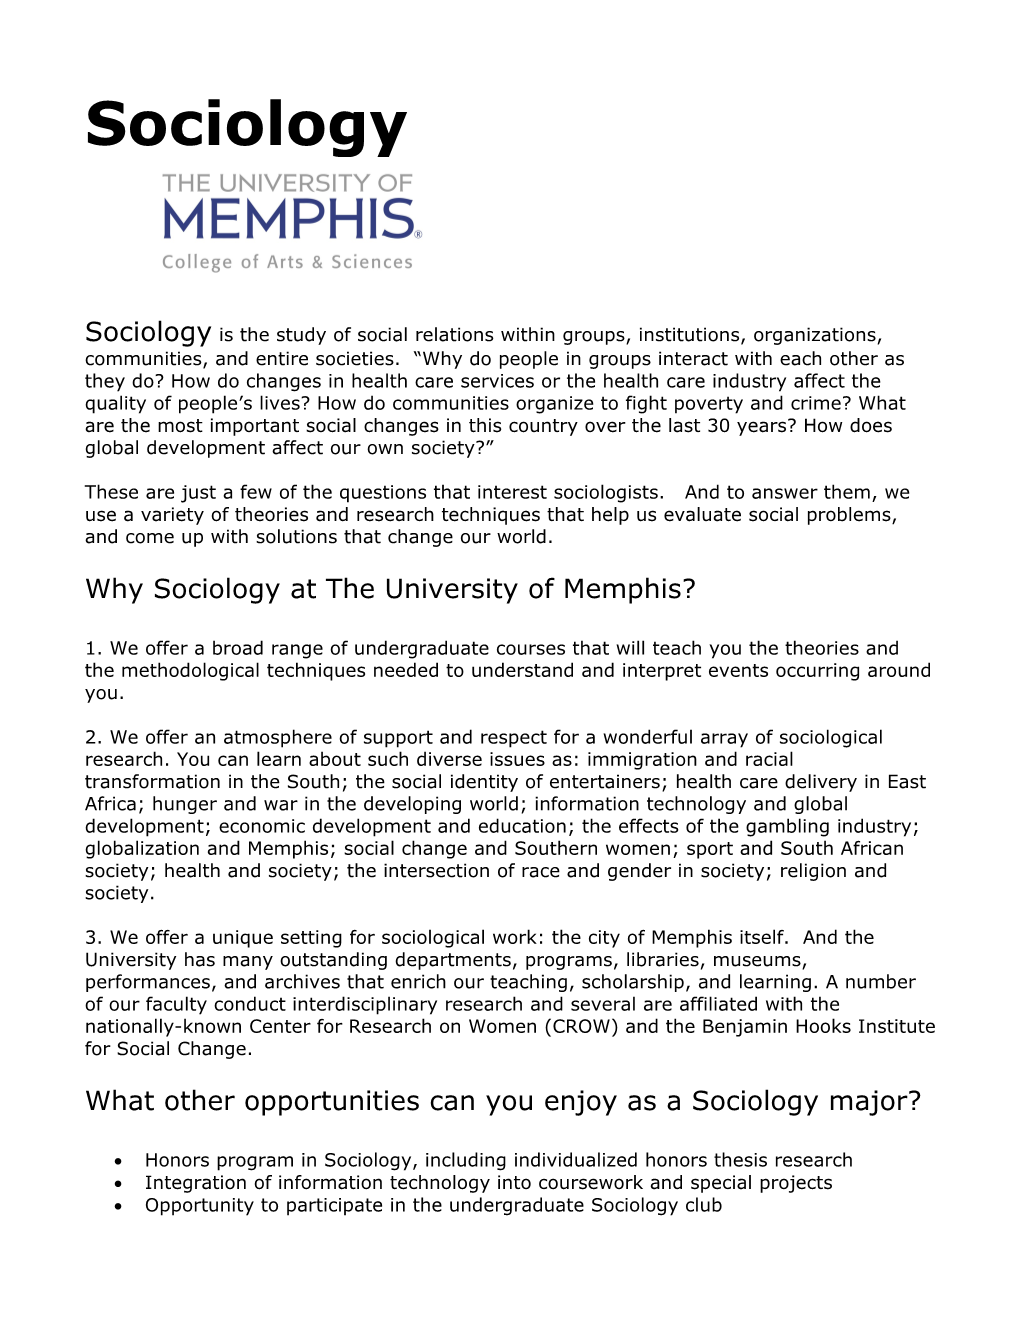 Why Sociology at the University of Memphis?